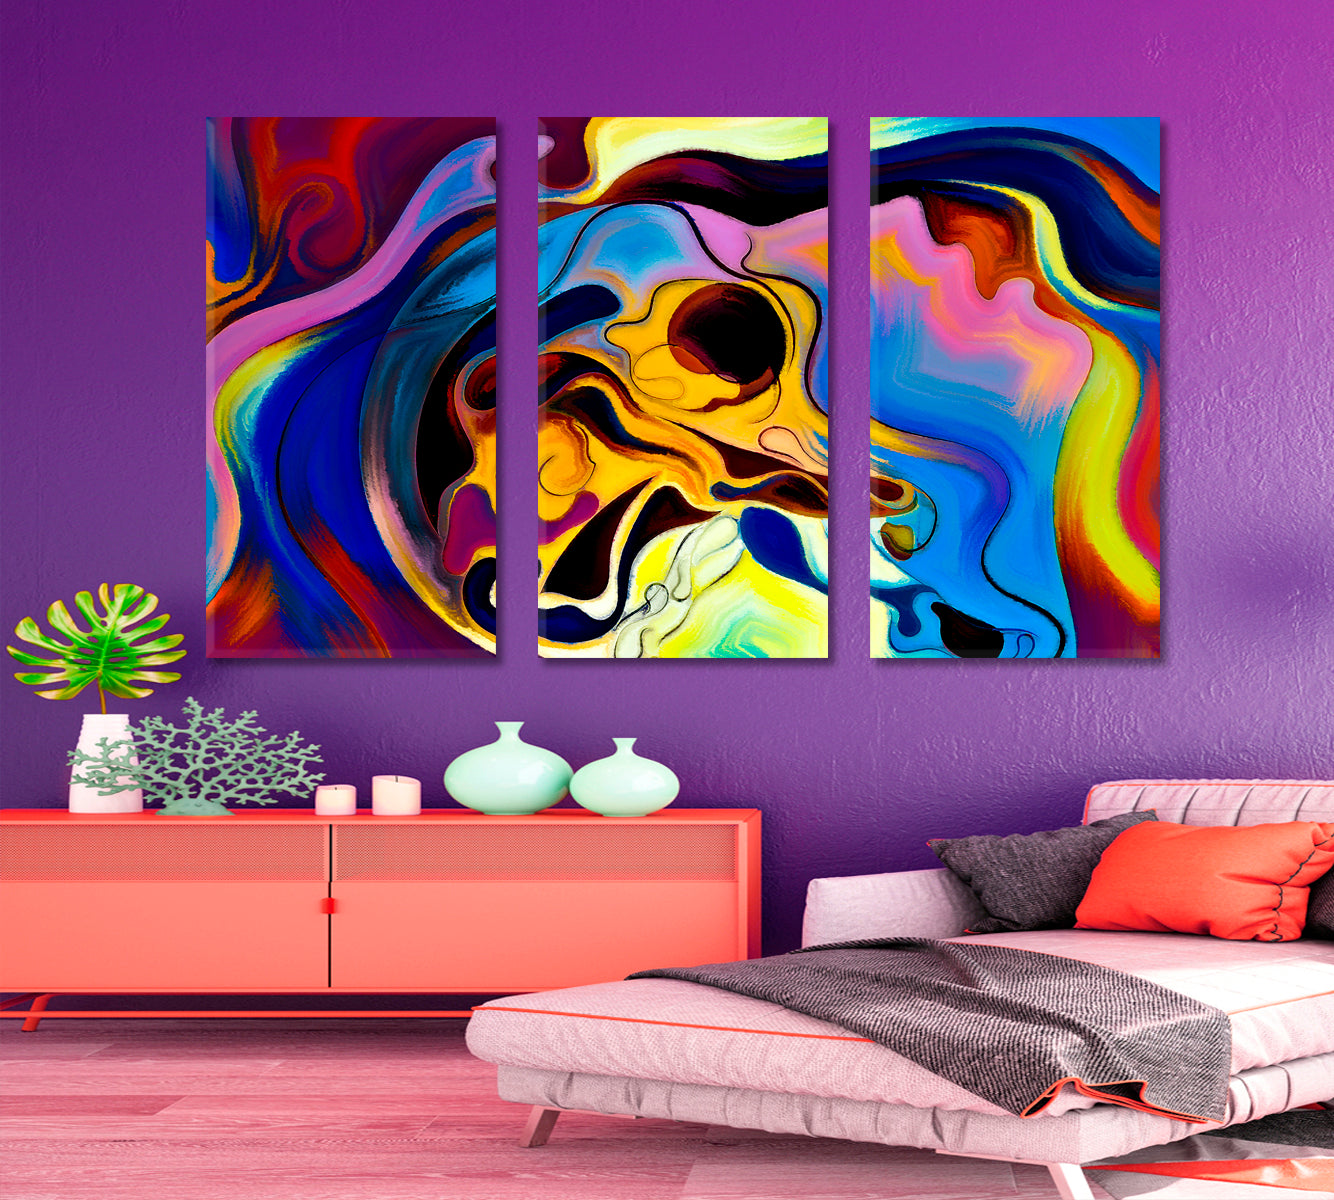 Self And Colorful Lines Mind Philosophy Creativity Imagination Abstraction Abstract Art Print Artesty 3 panels 36" x 24" 